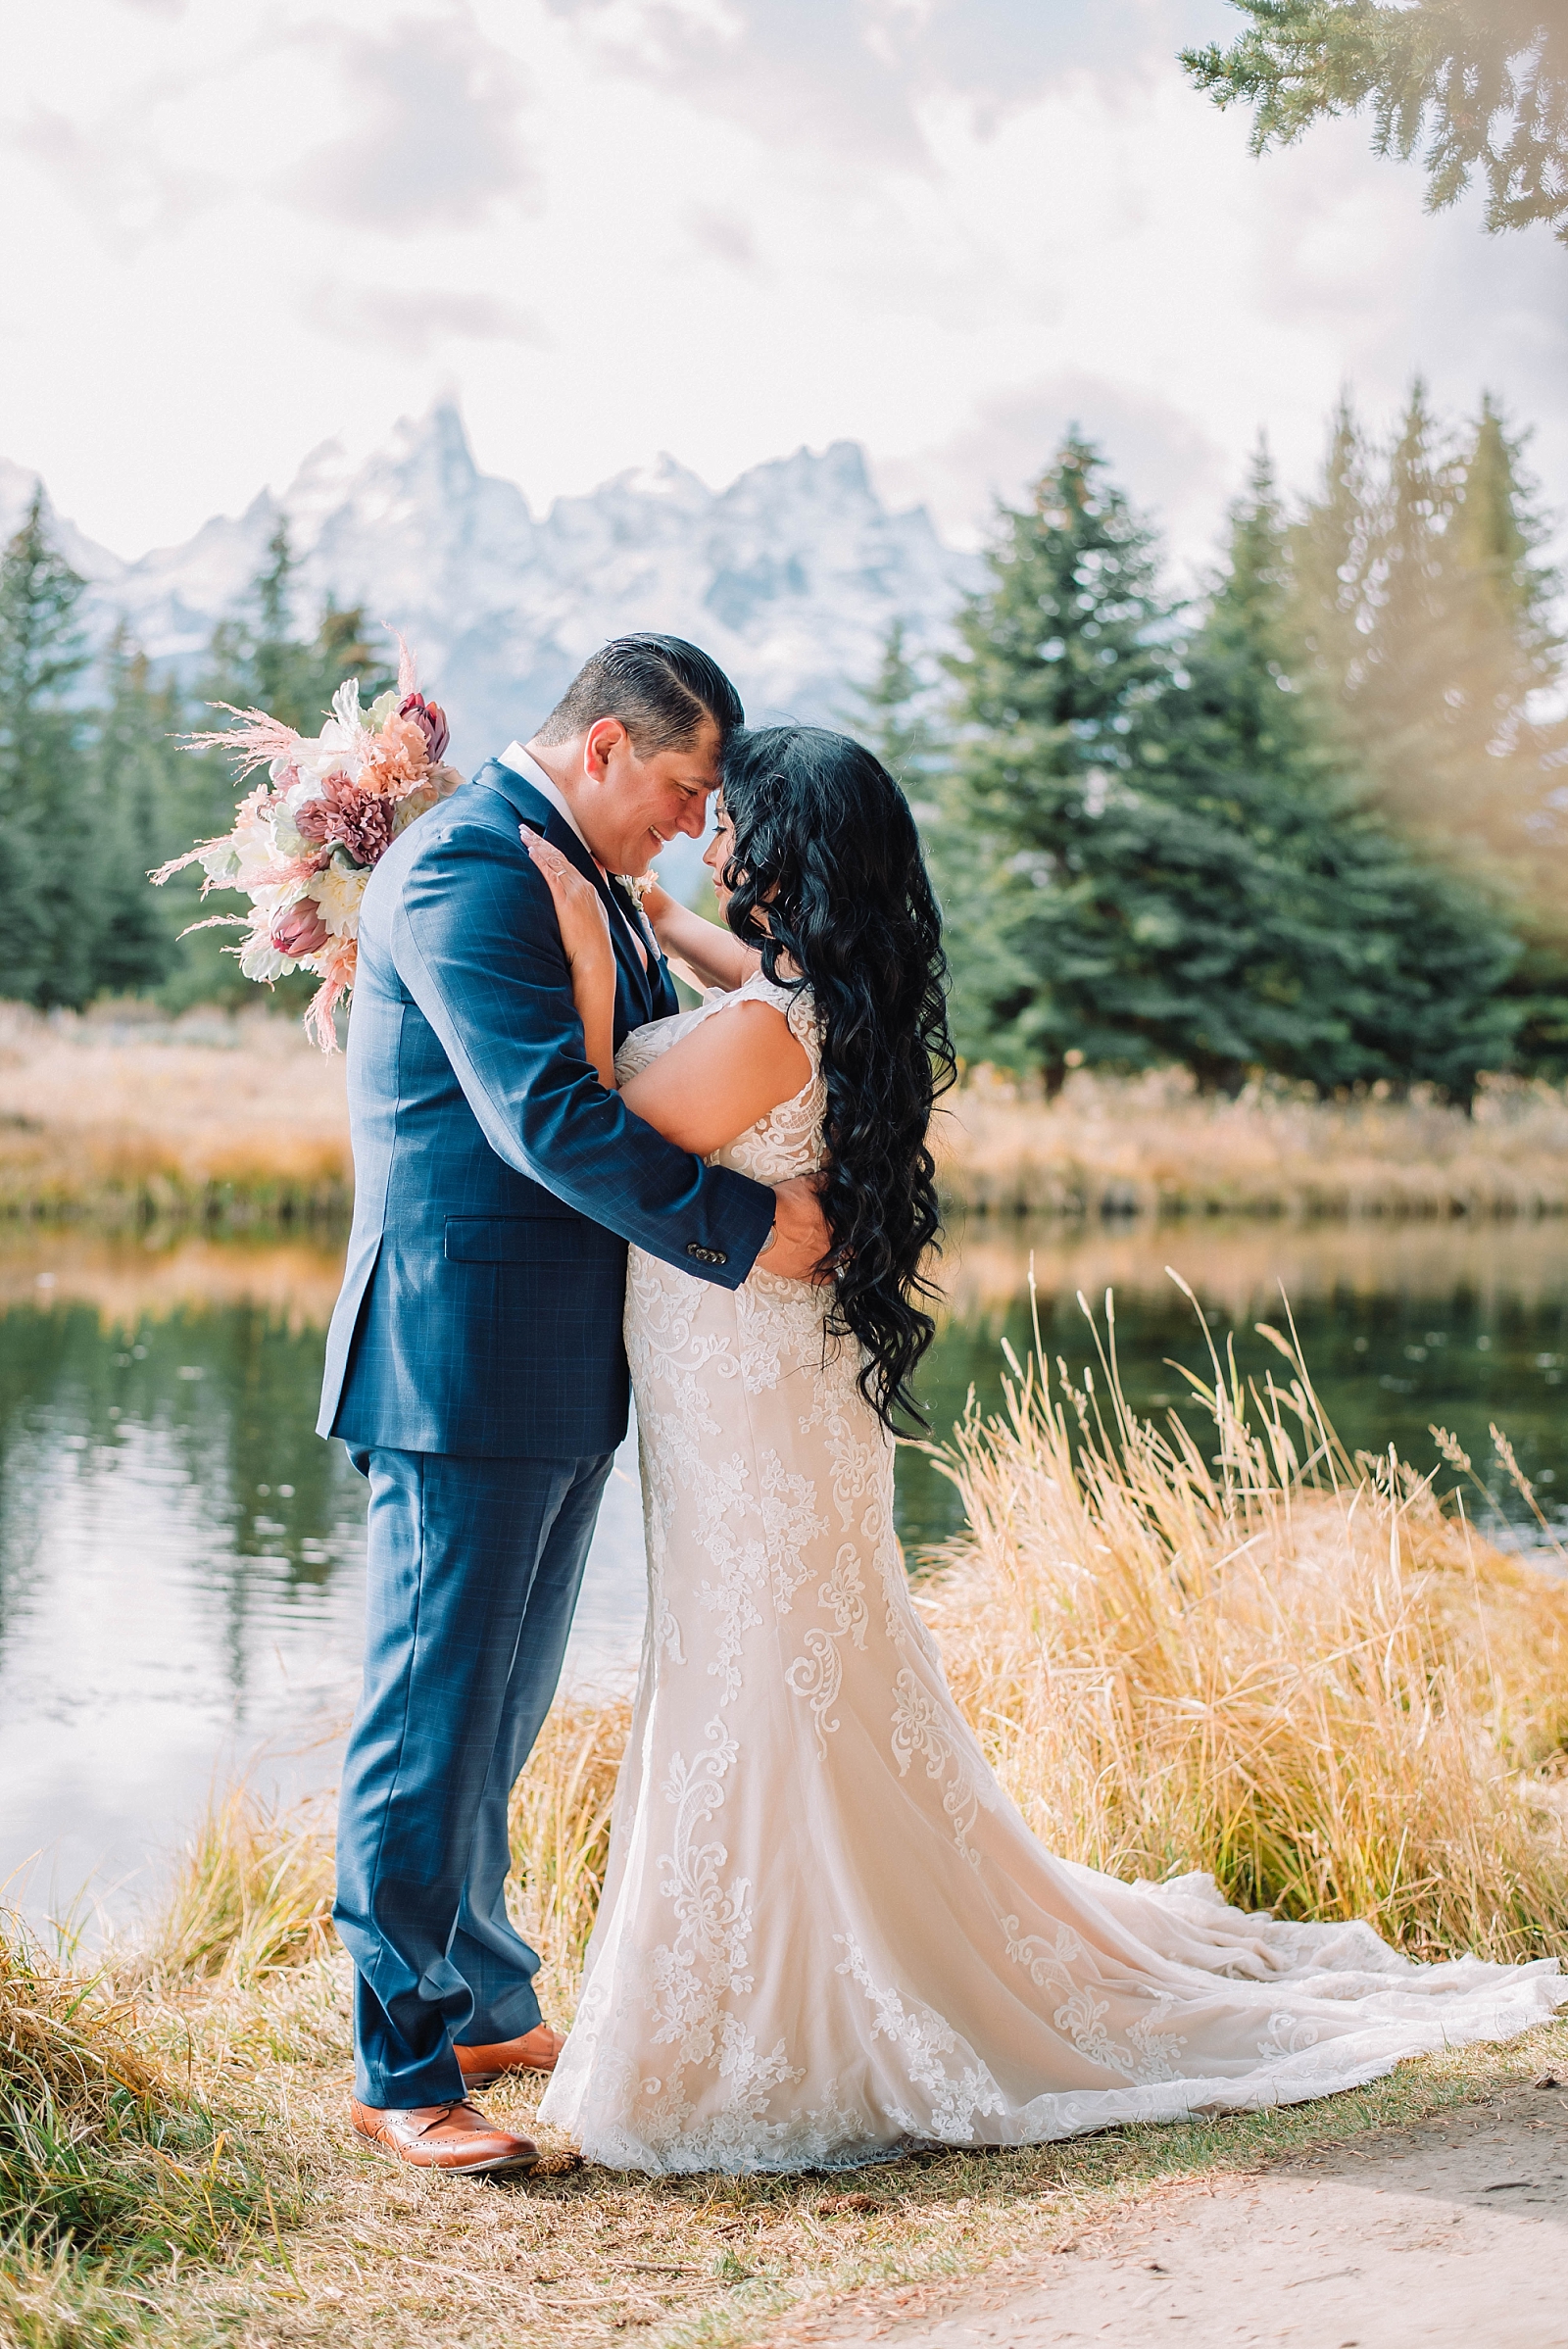 Couple weds in private ceremony at Schwabacher Landing